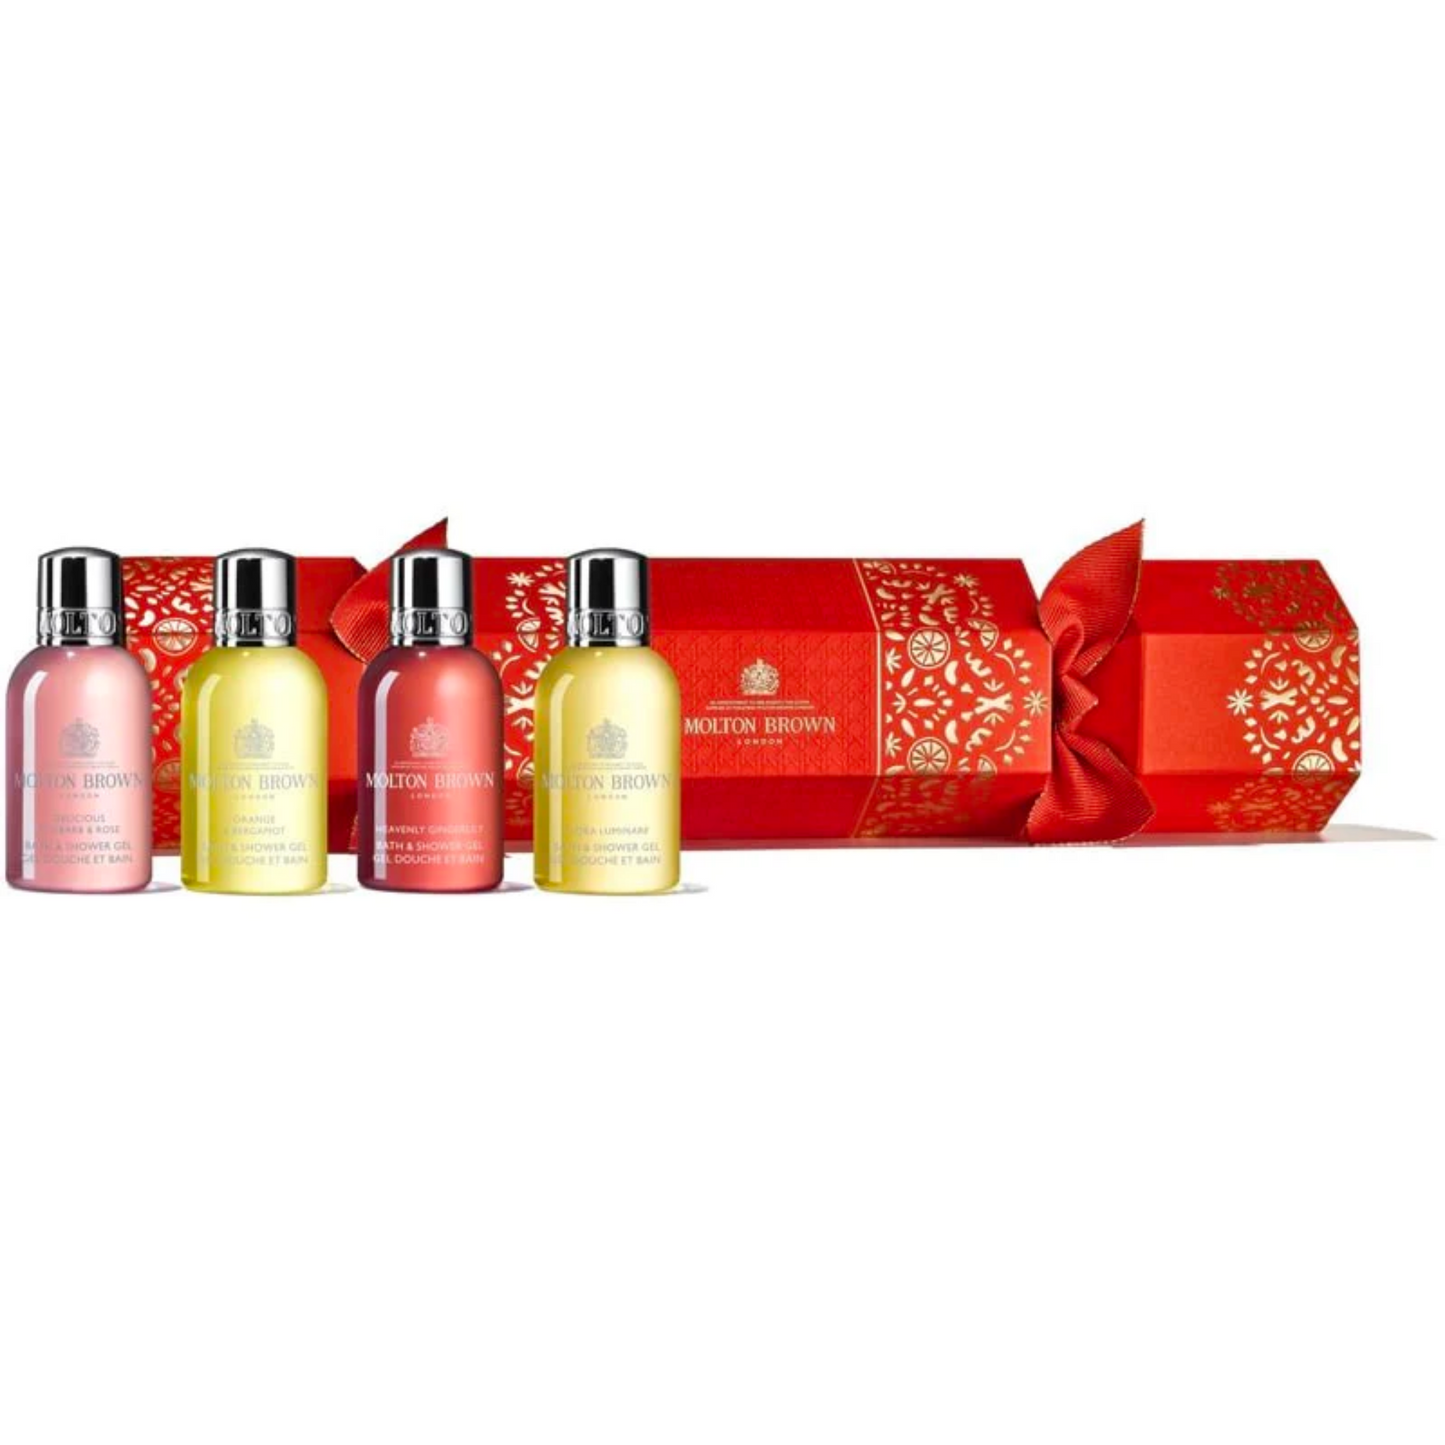 Primary Image of Floral + Citrus Christmas Cracker